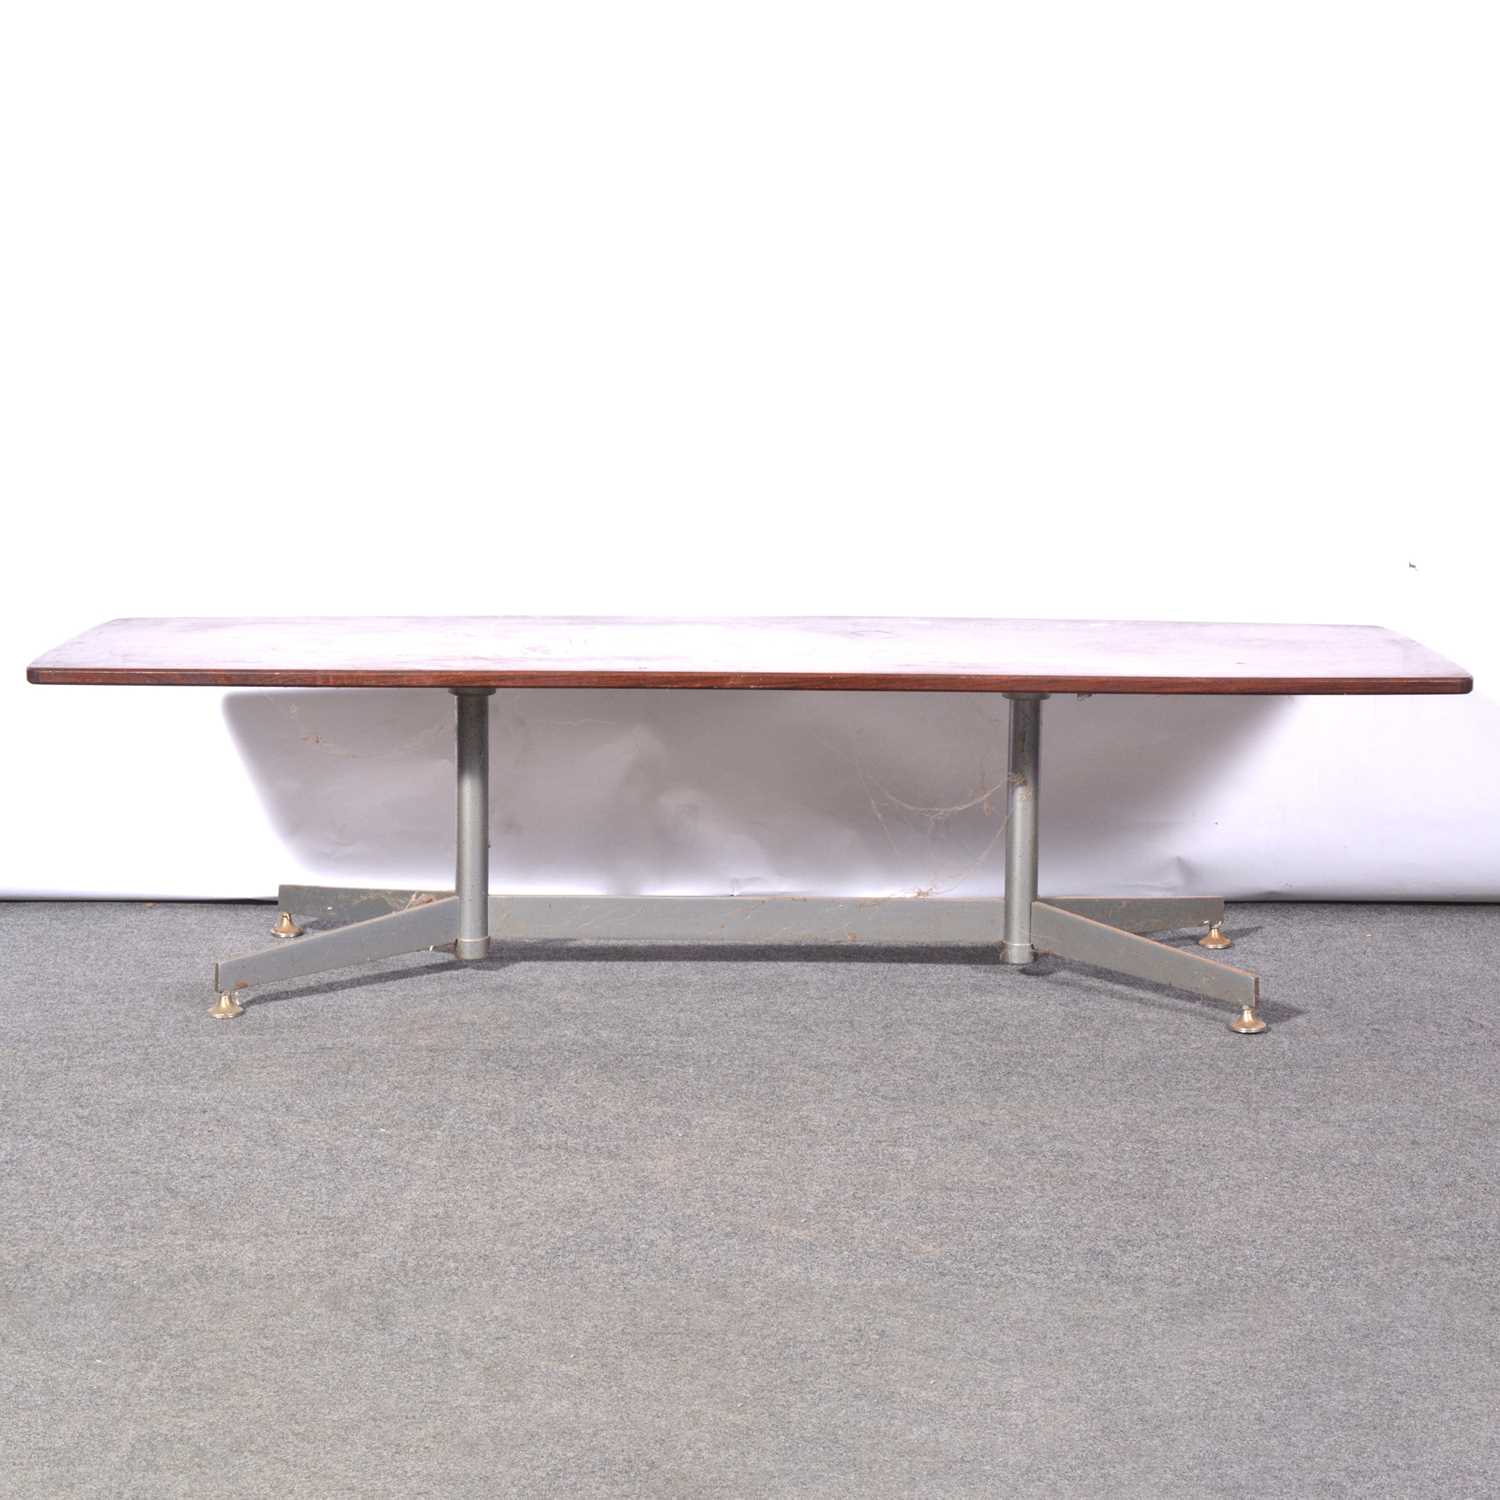 Lot 7 - 1960s rosewood and chrome metal coffee table, G Morley & Son, High Wycombe